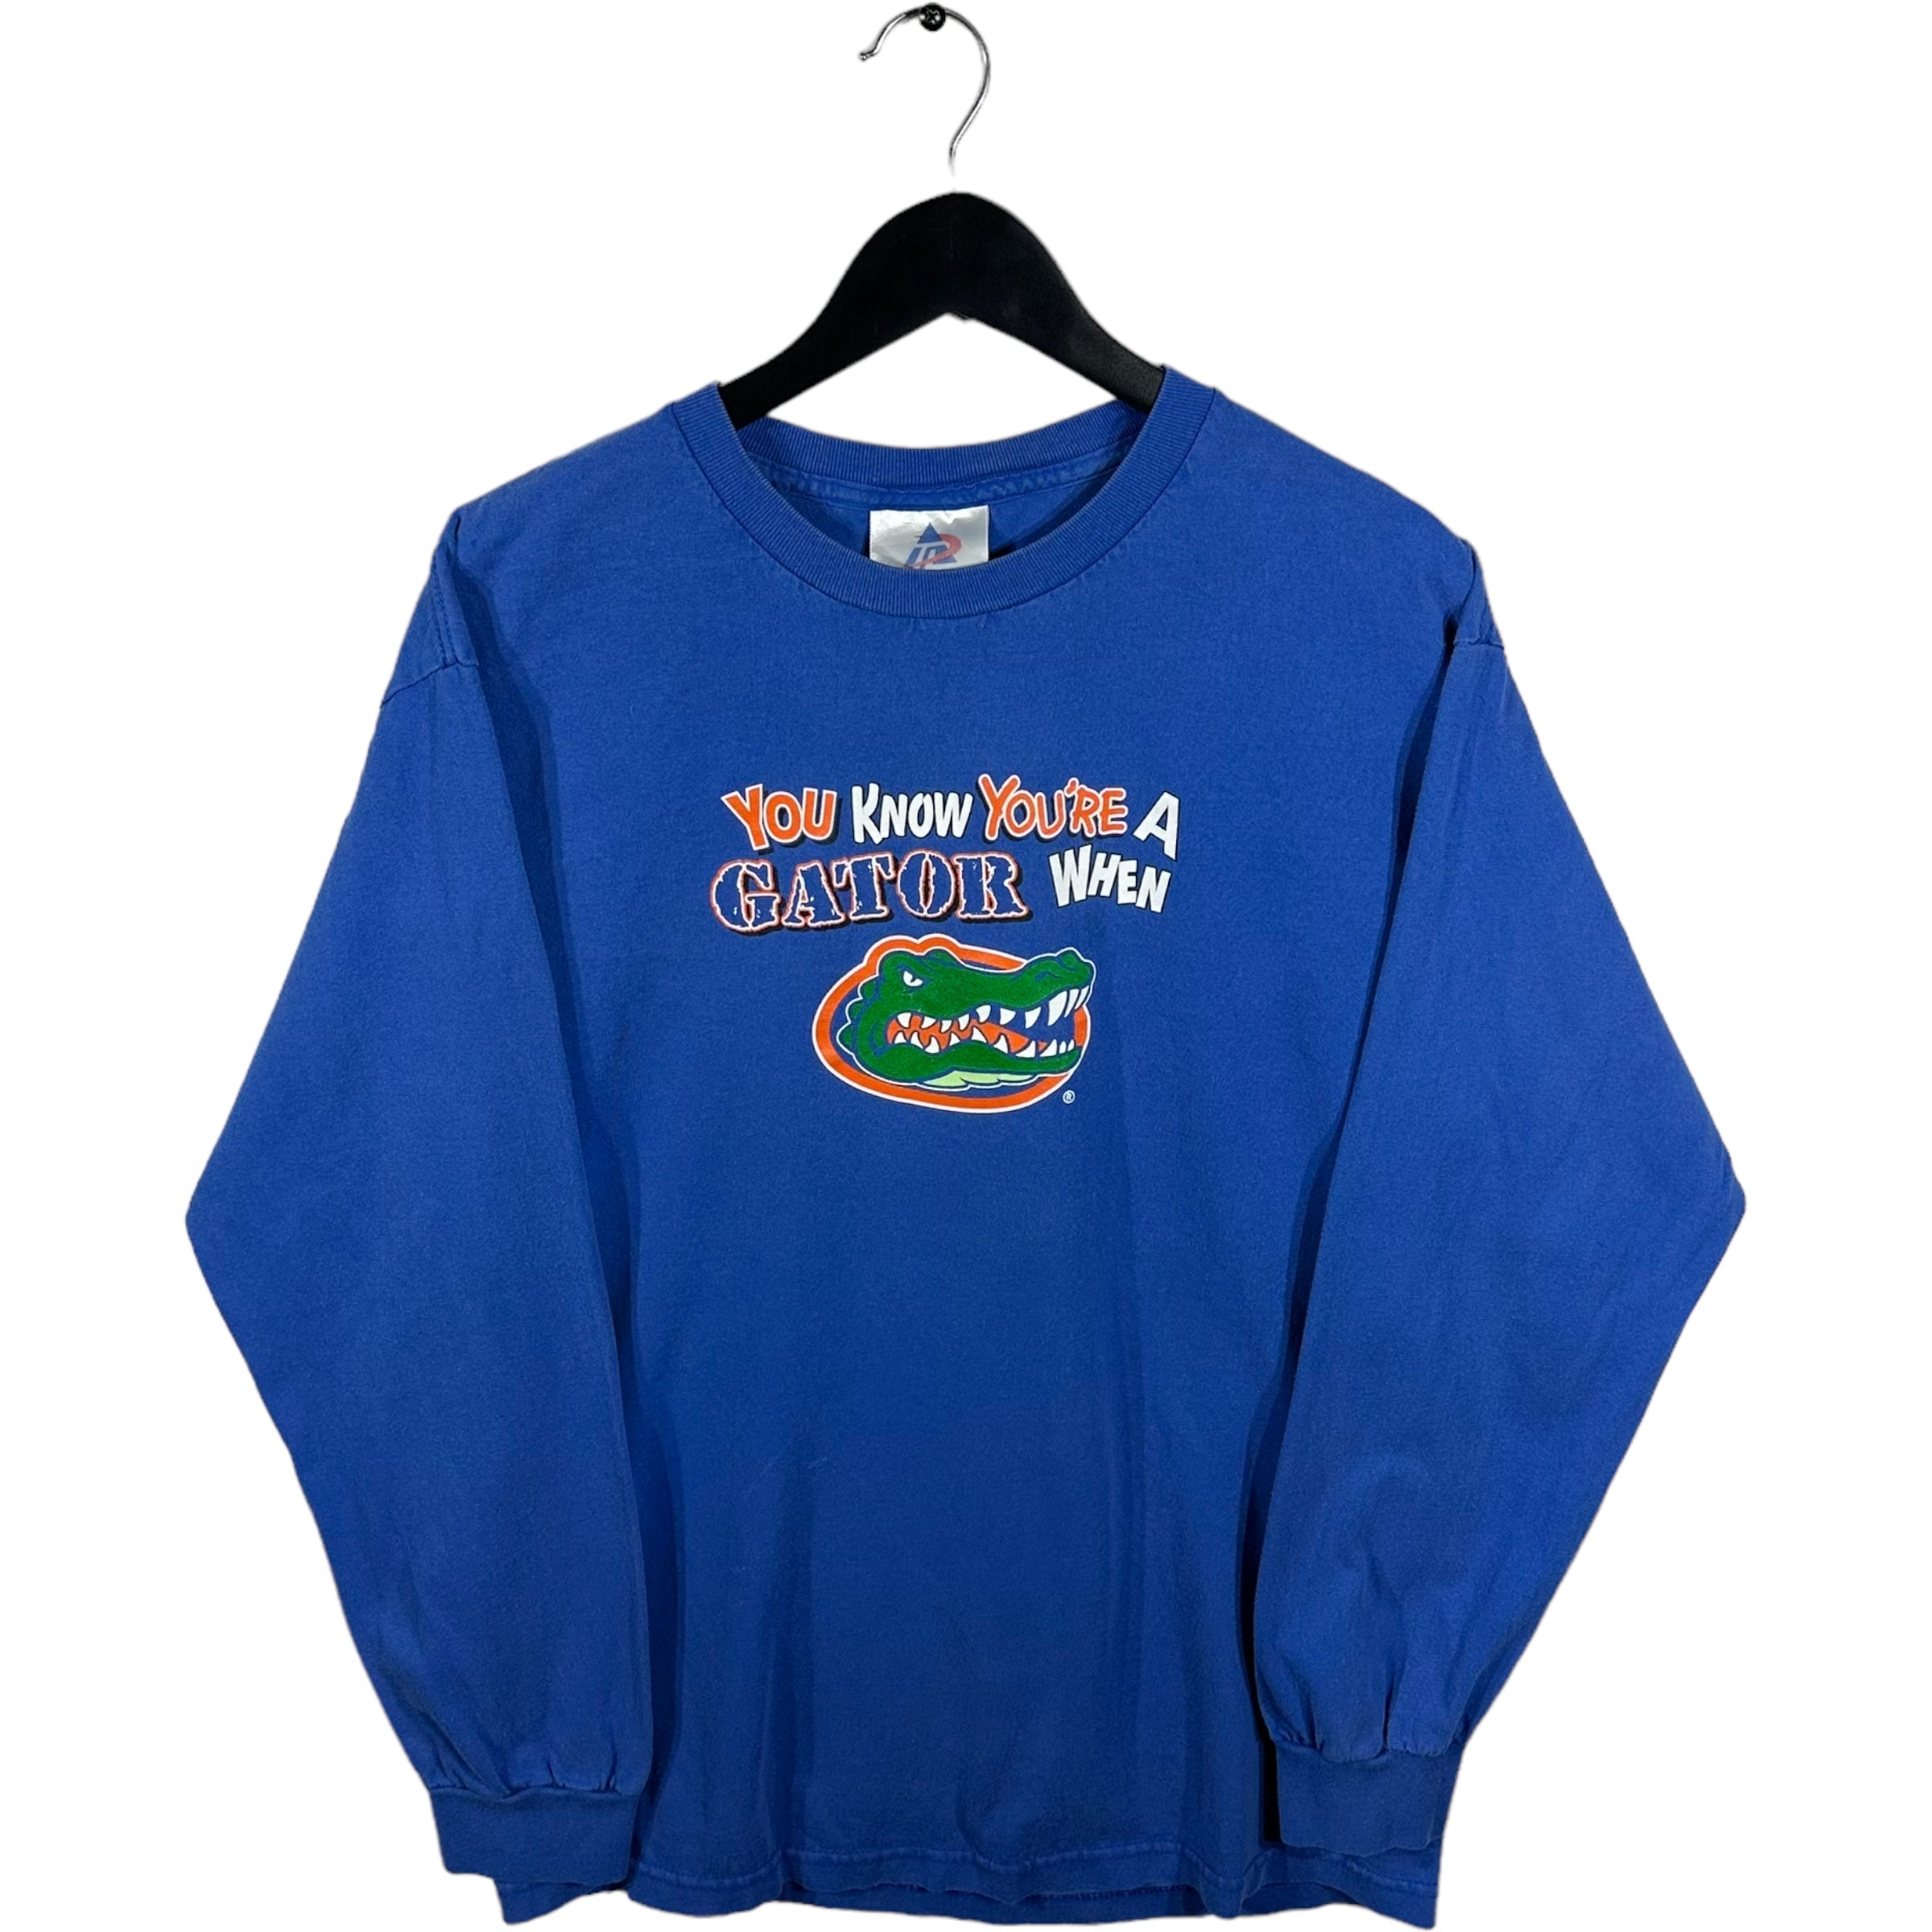 Vintage University Of Florida "You Know You're A Gator When" Long Sleeve Tee